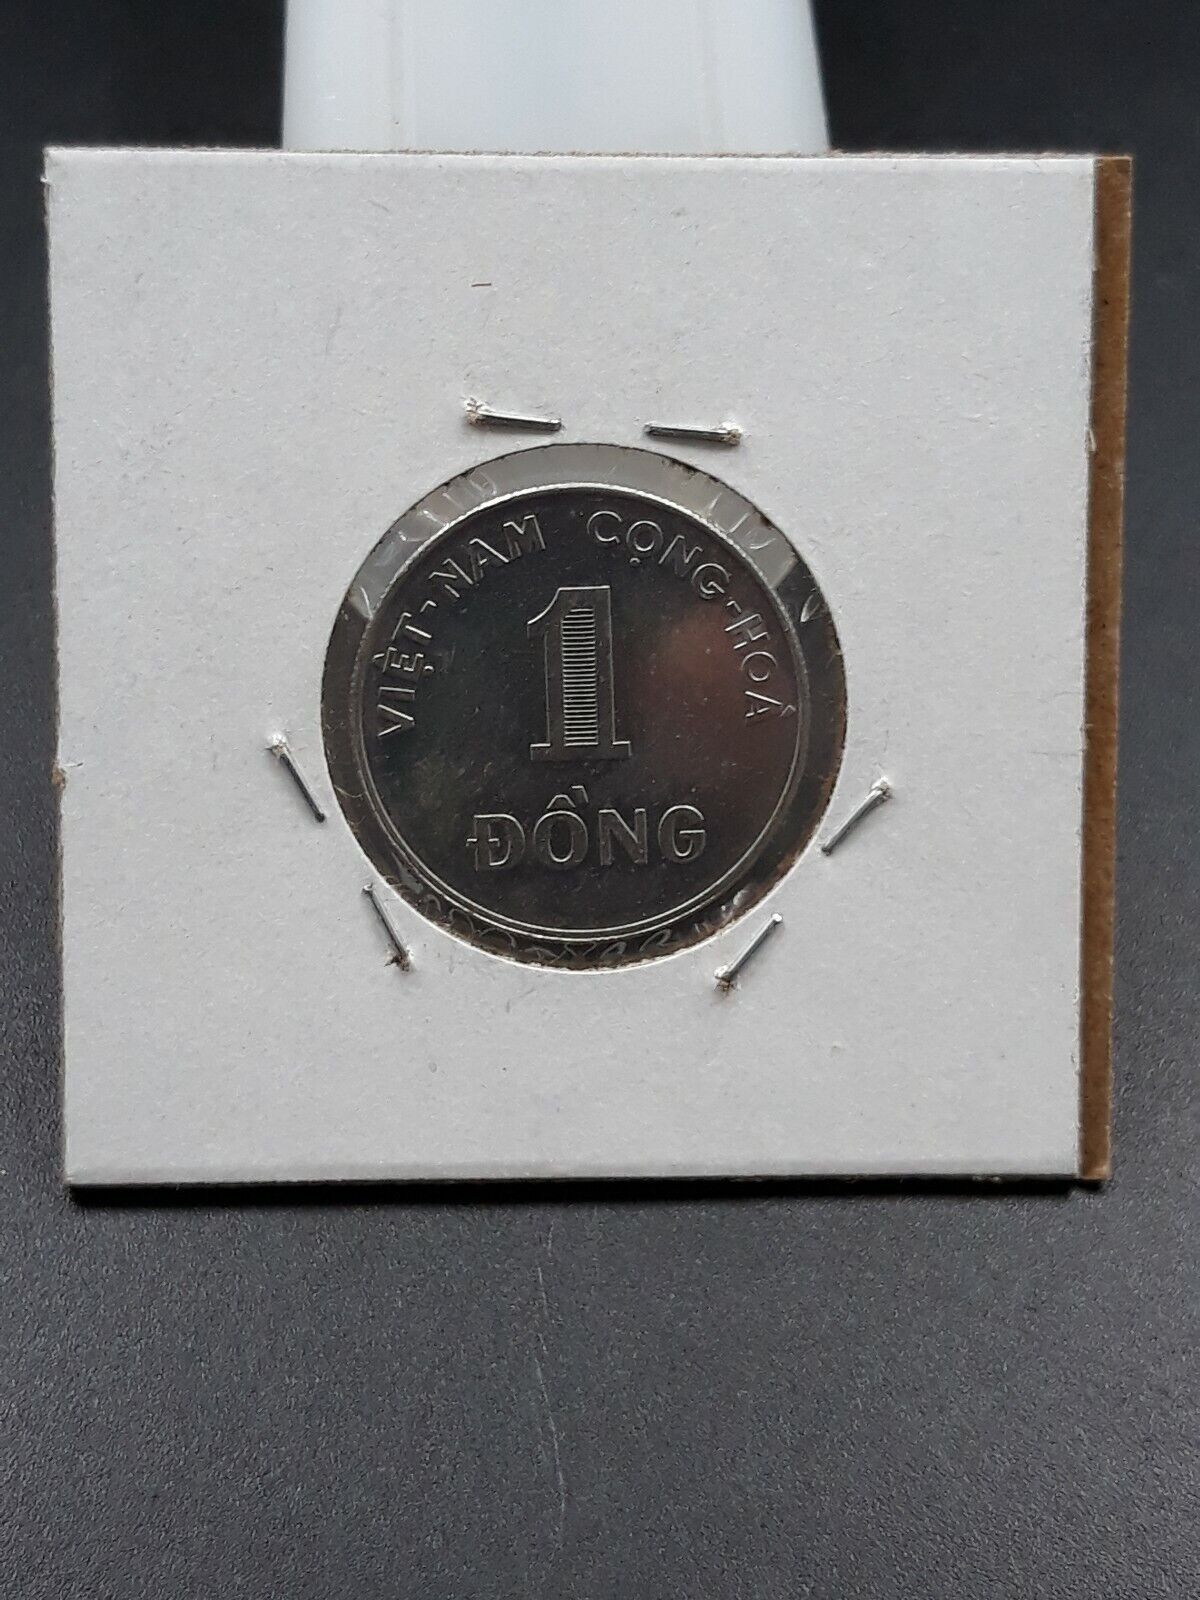 1971 V VIETNAM 1 Dong Choice BU UNC Rice Plant Coin Nickel Clad Steel Alloy